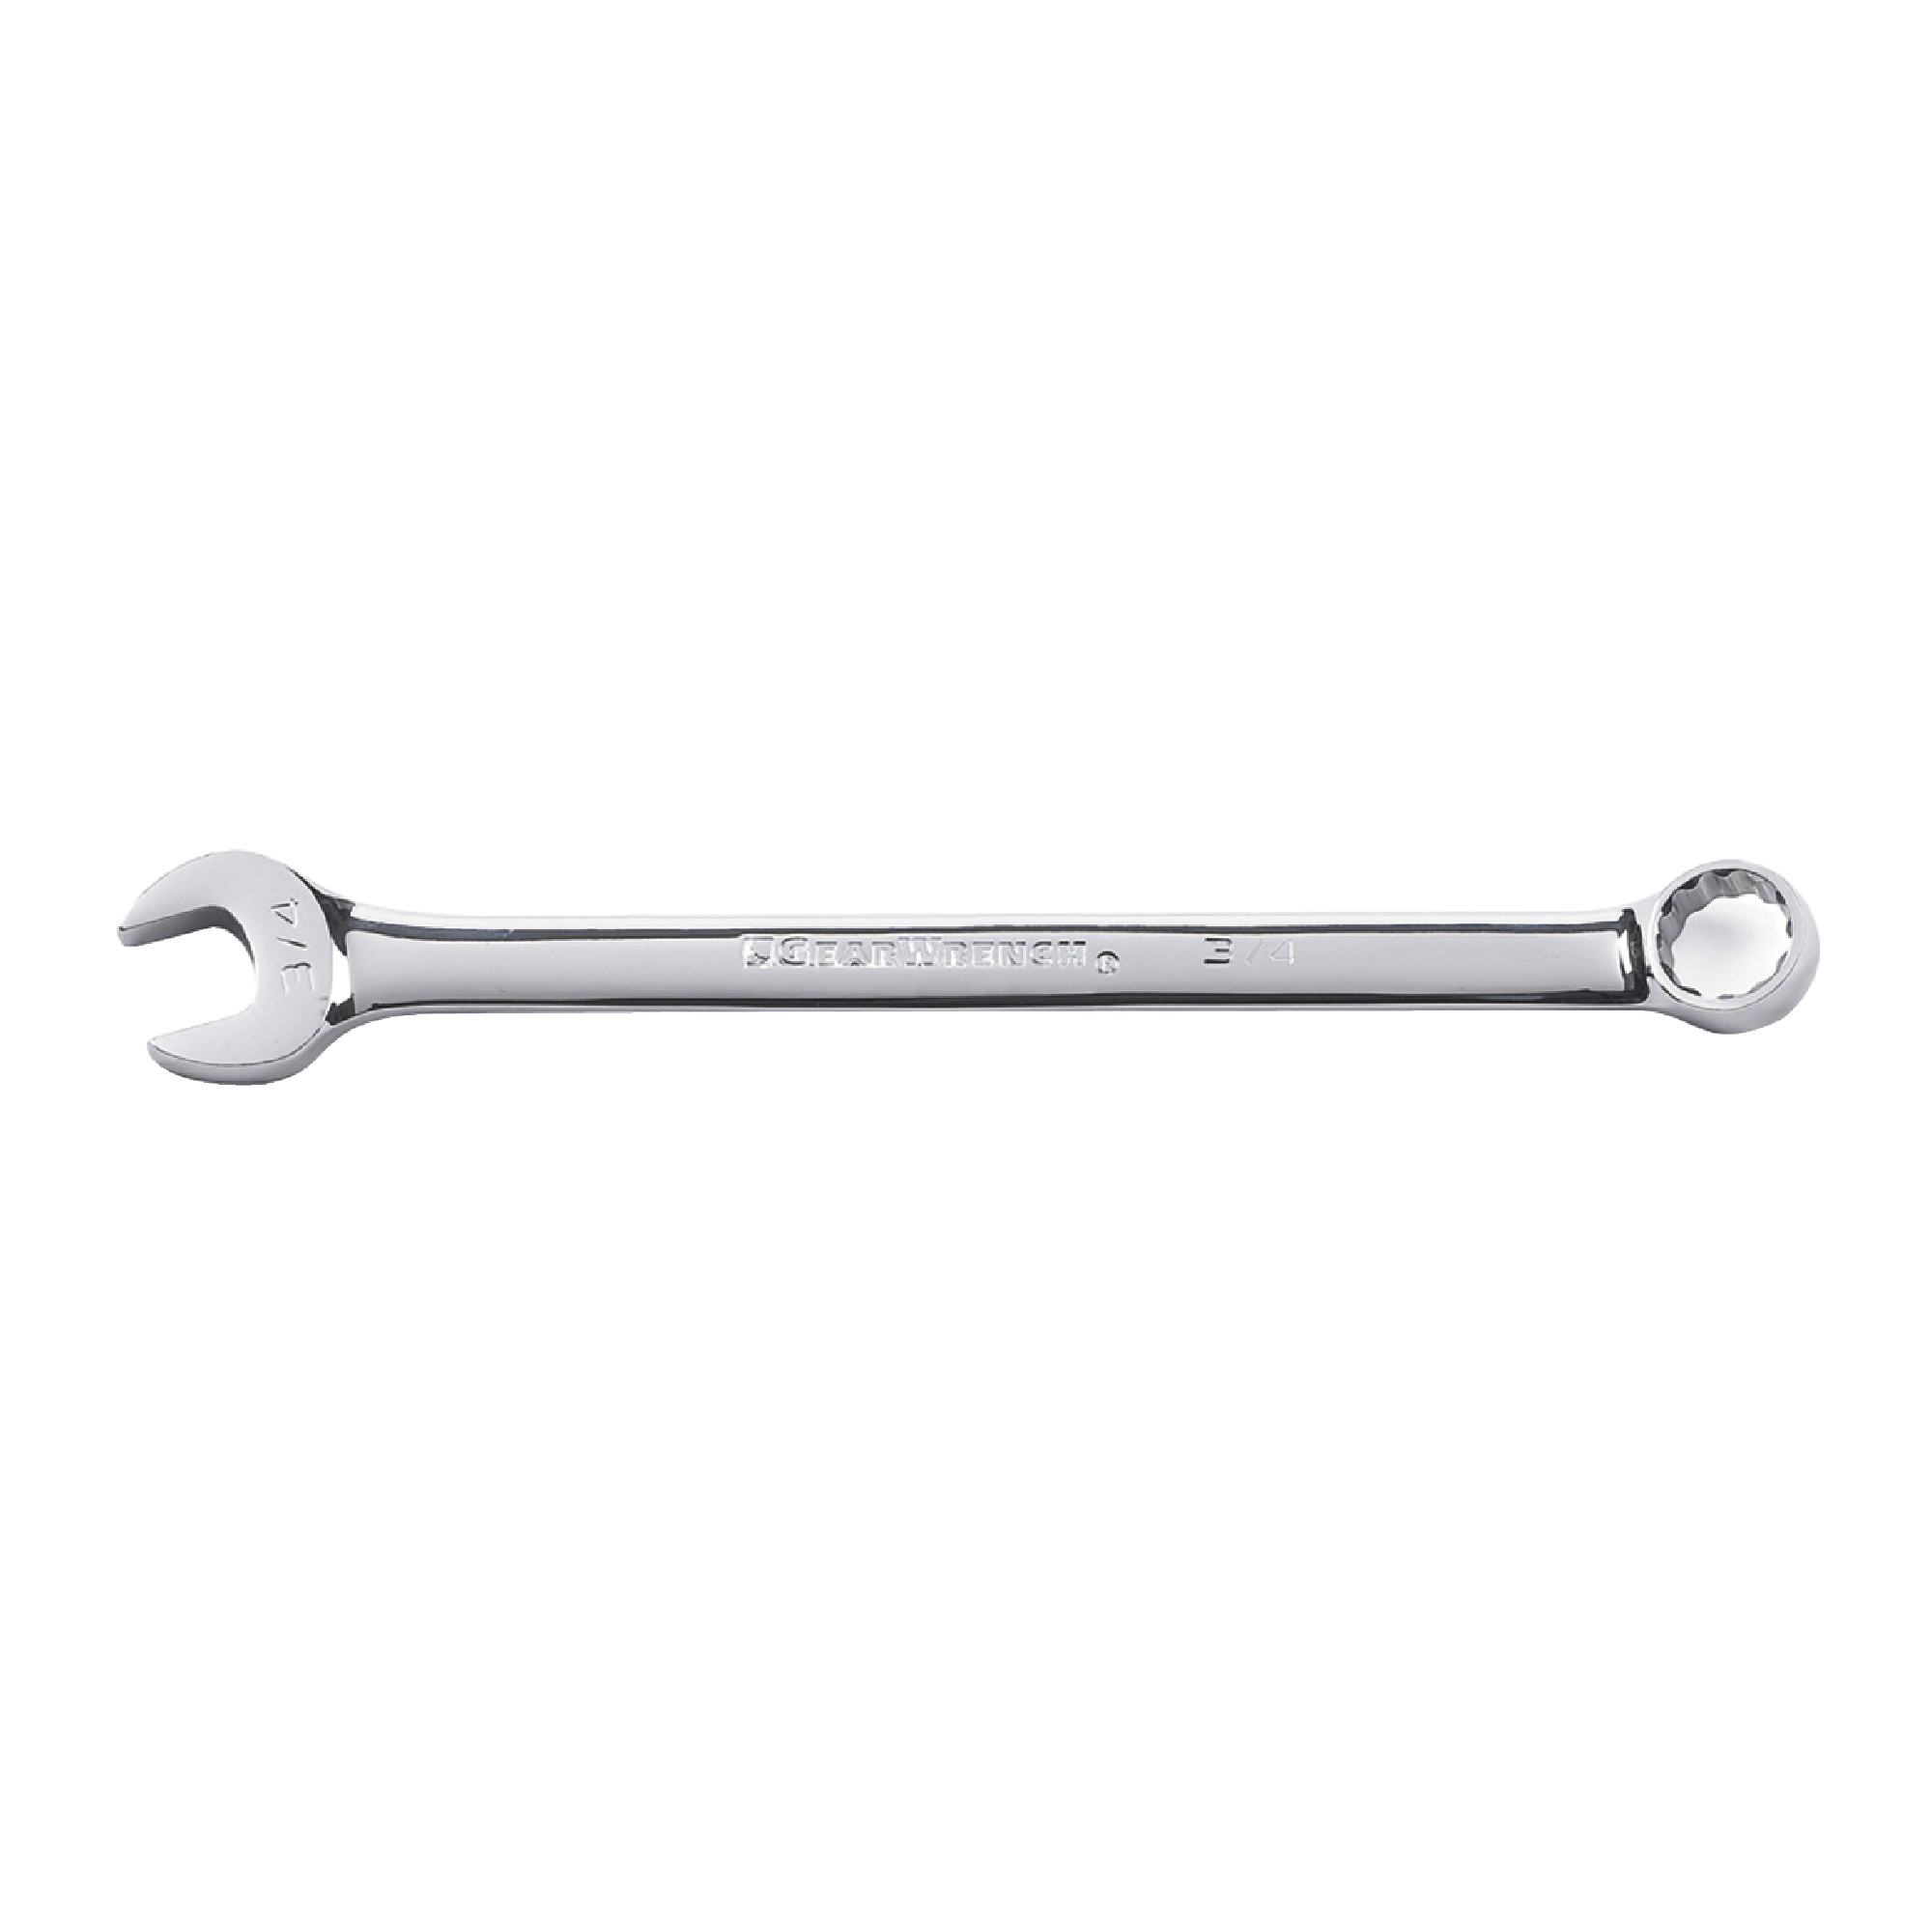 12mm 12 Point Long Pattern Combination Wrench